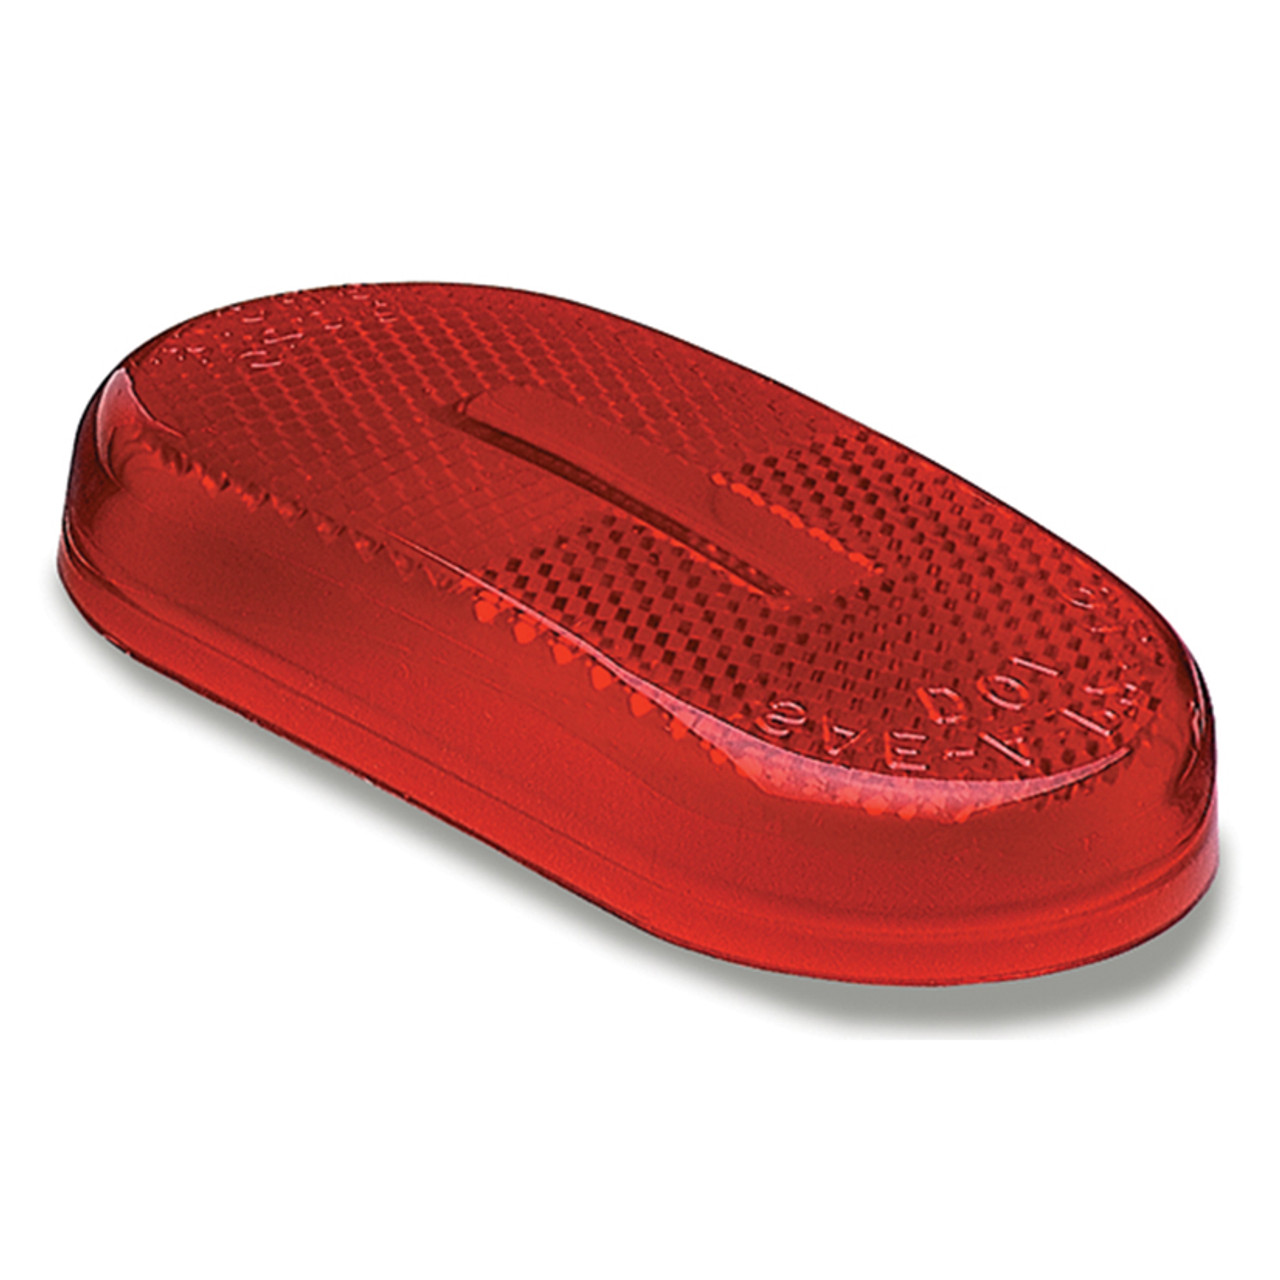 Clearance/Marker Oval Replacement Lens w/Built-in Reflector - Red  90202